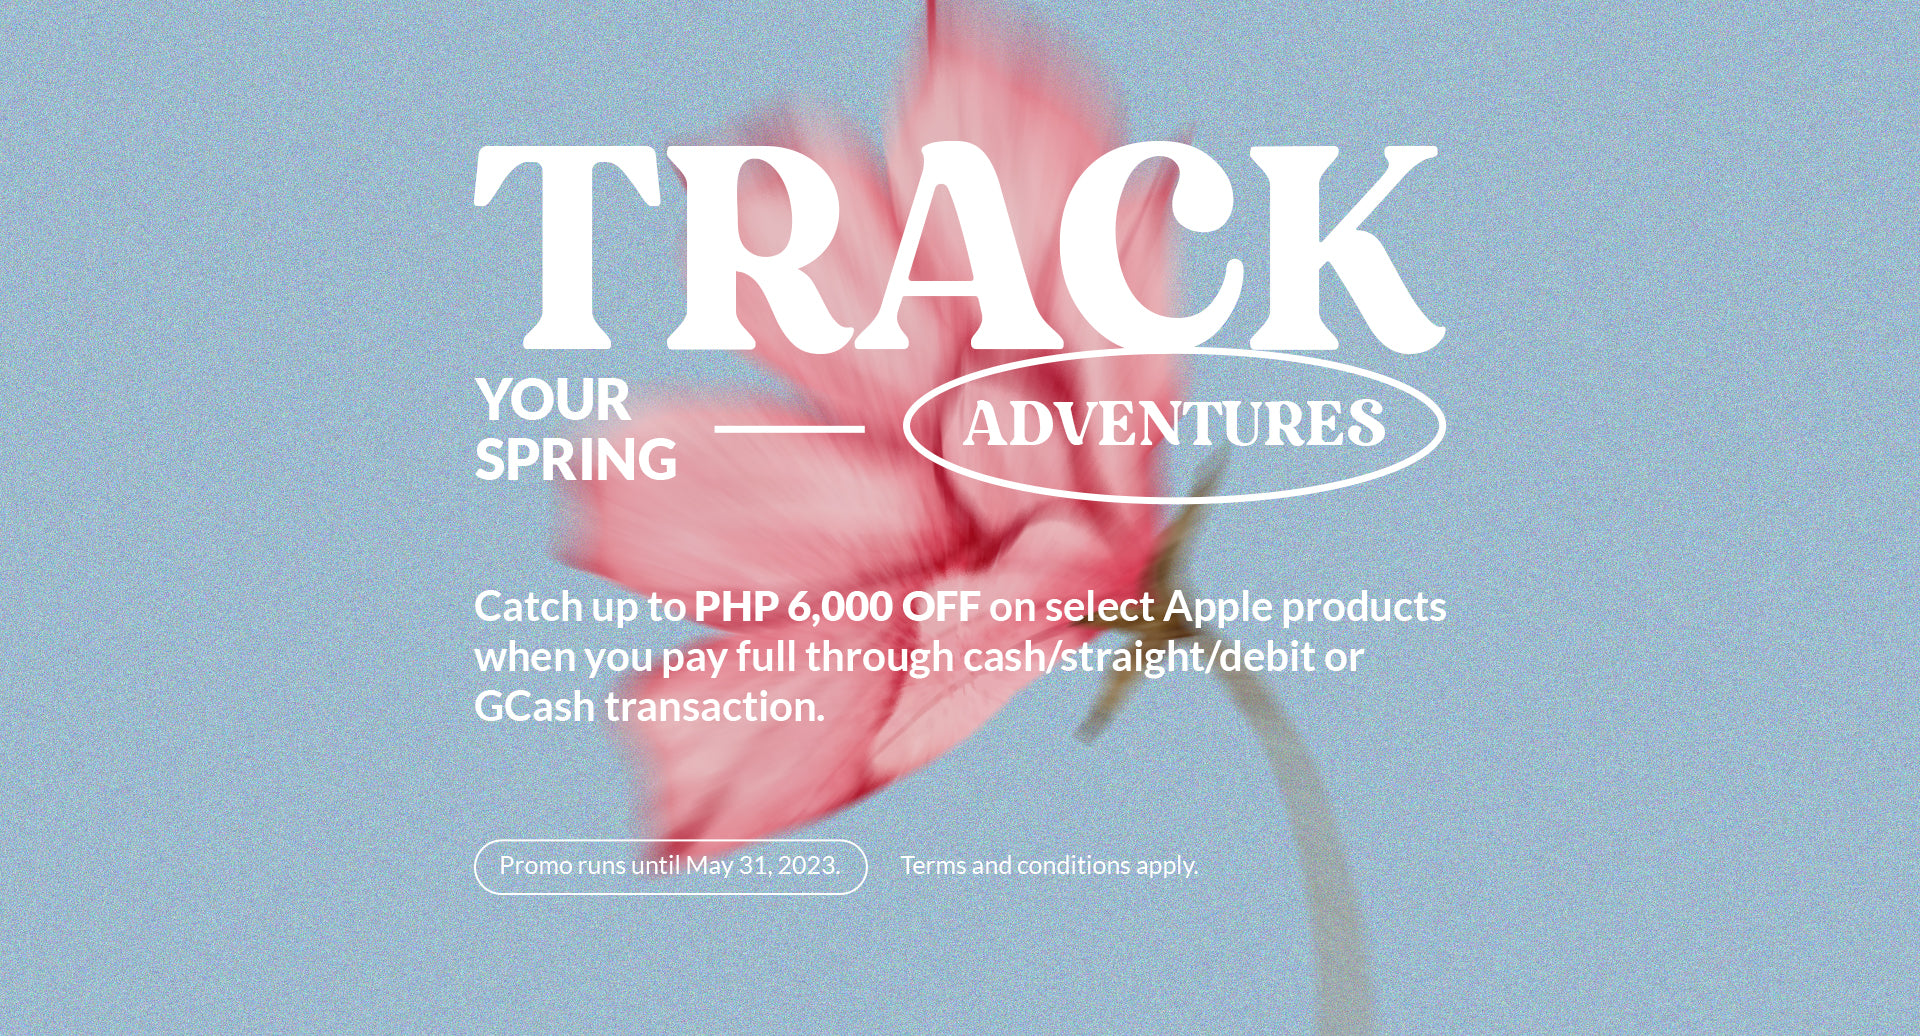 Track your spring adventures! Catch up to PHP6,000 off on select Apple products.